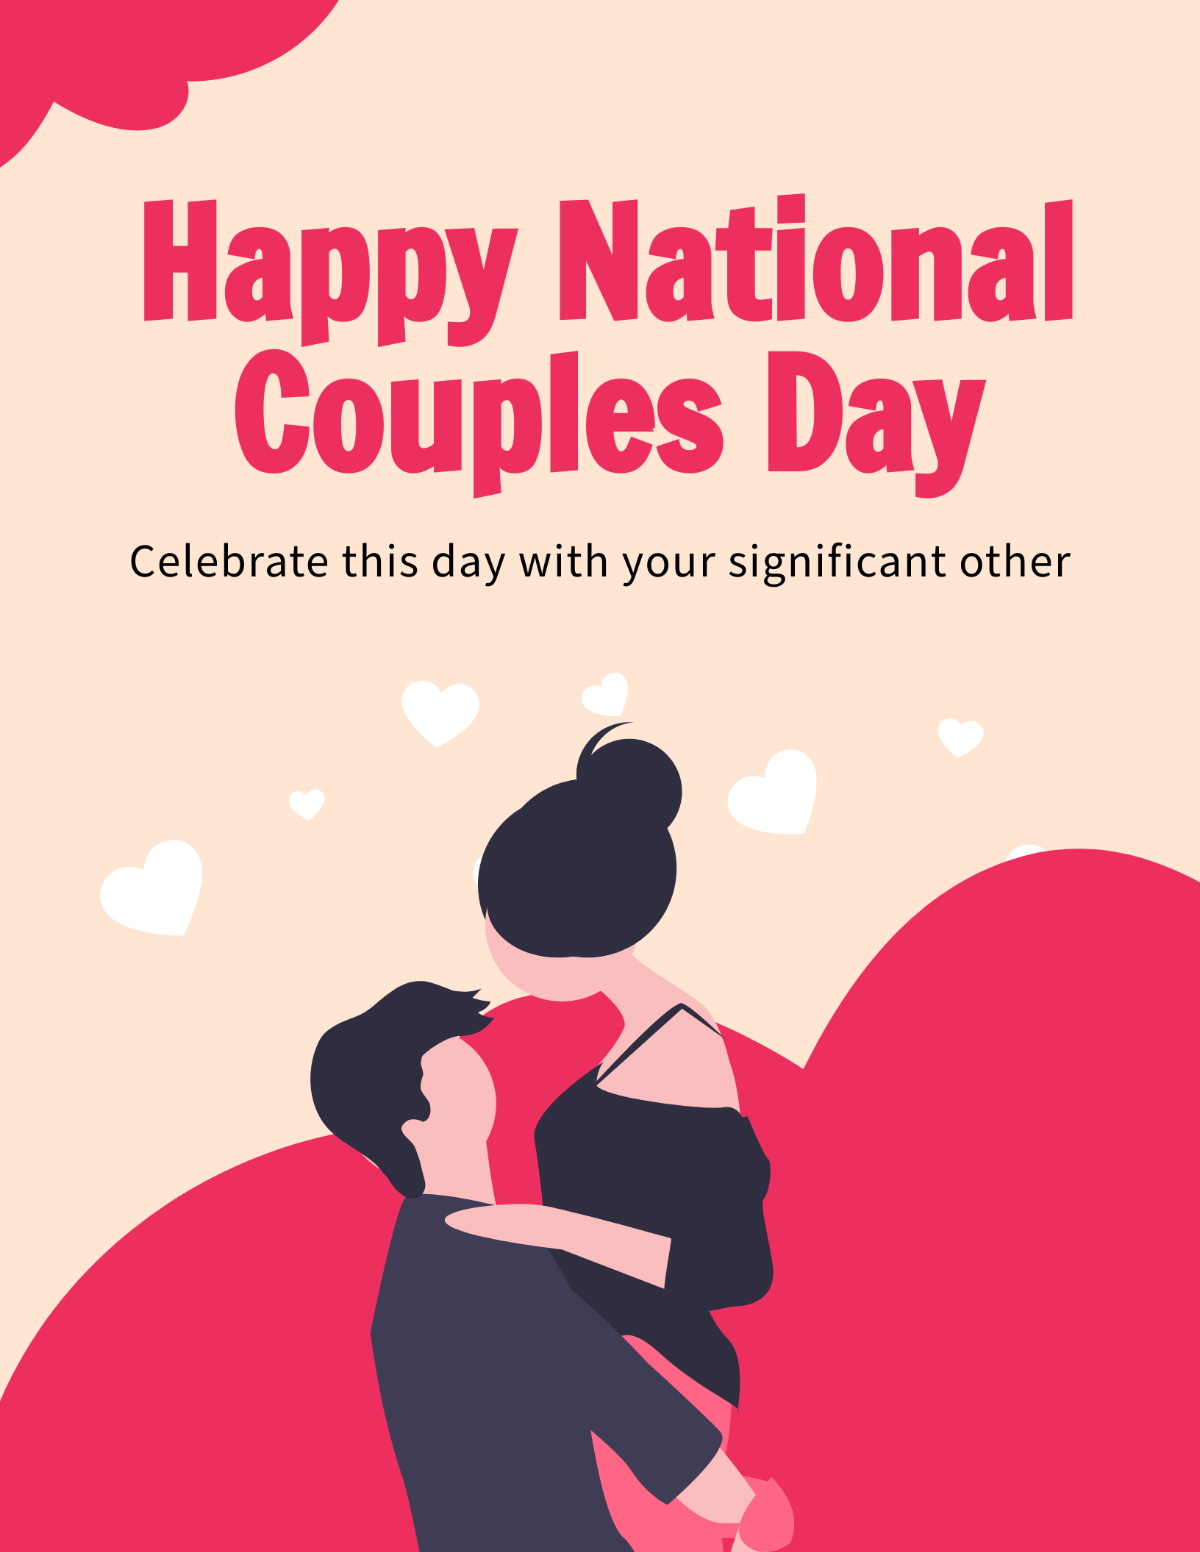 National Couples Day Flyer